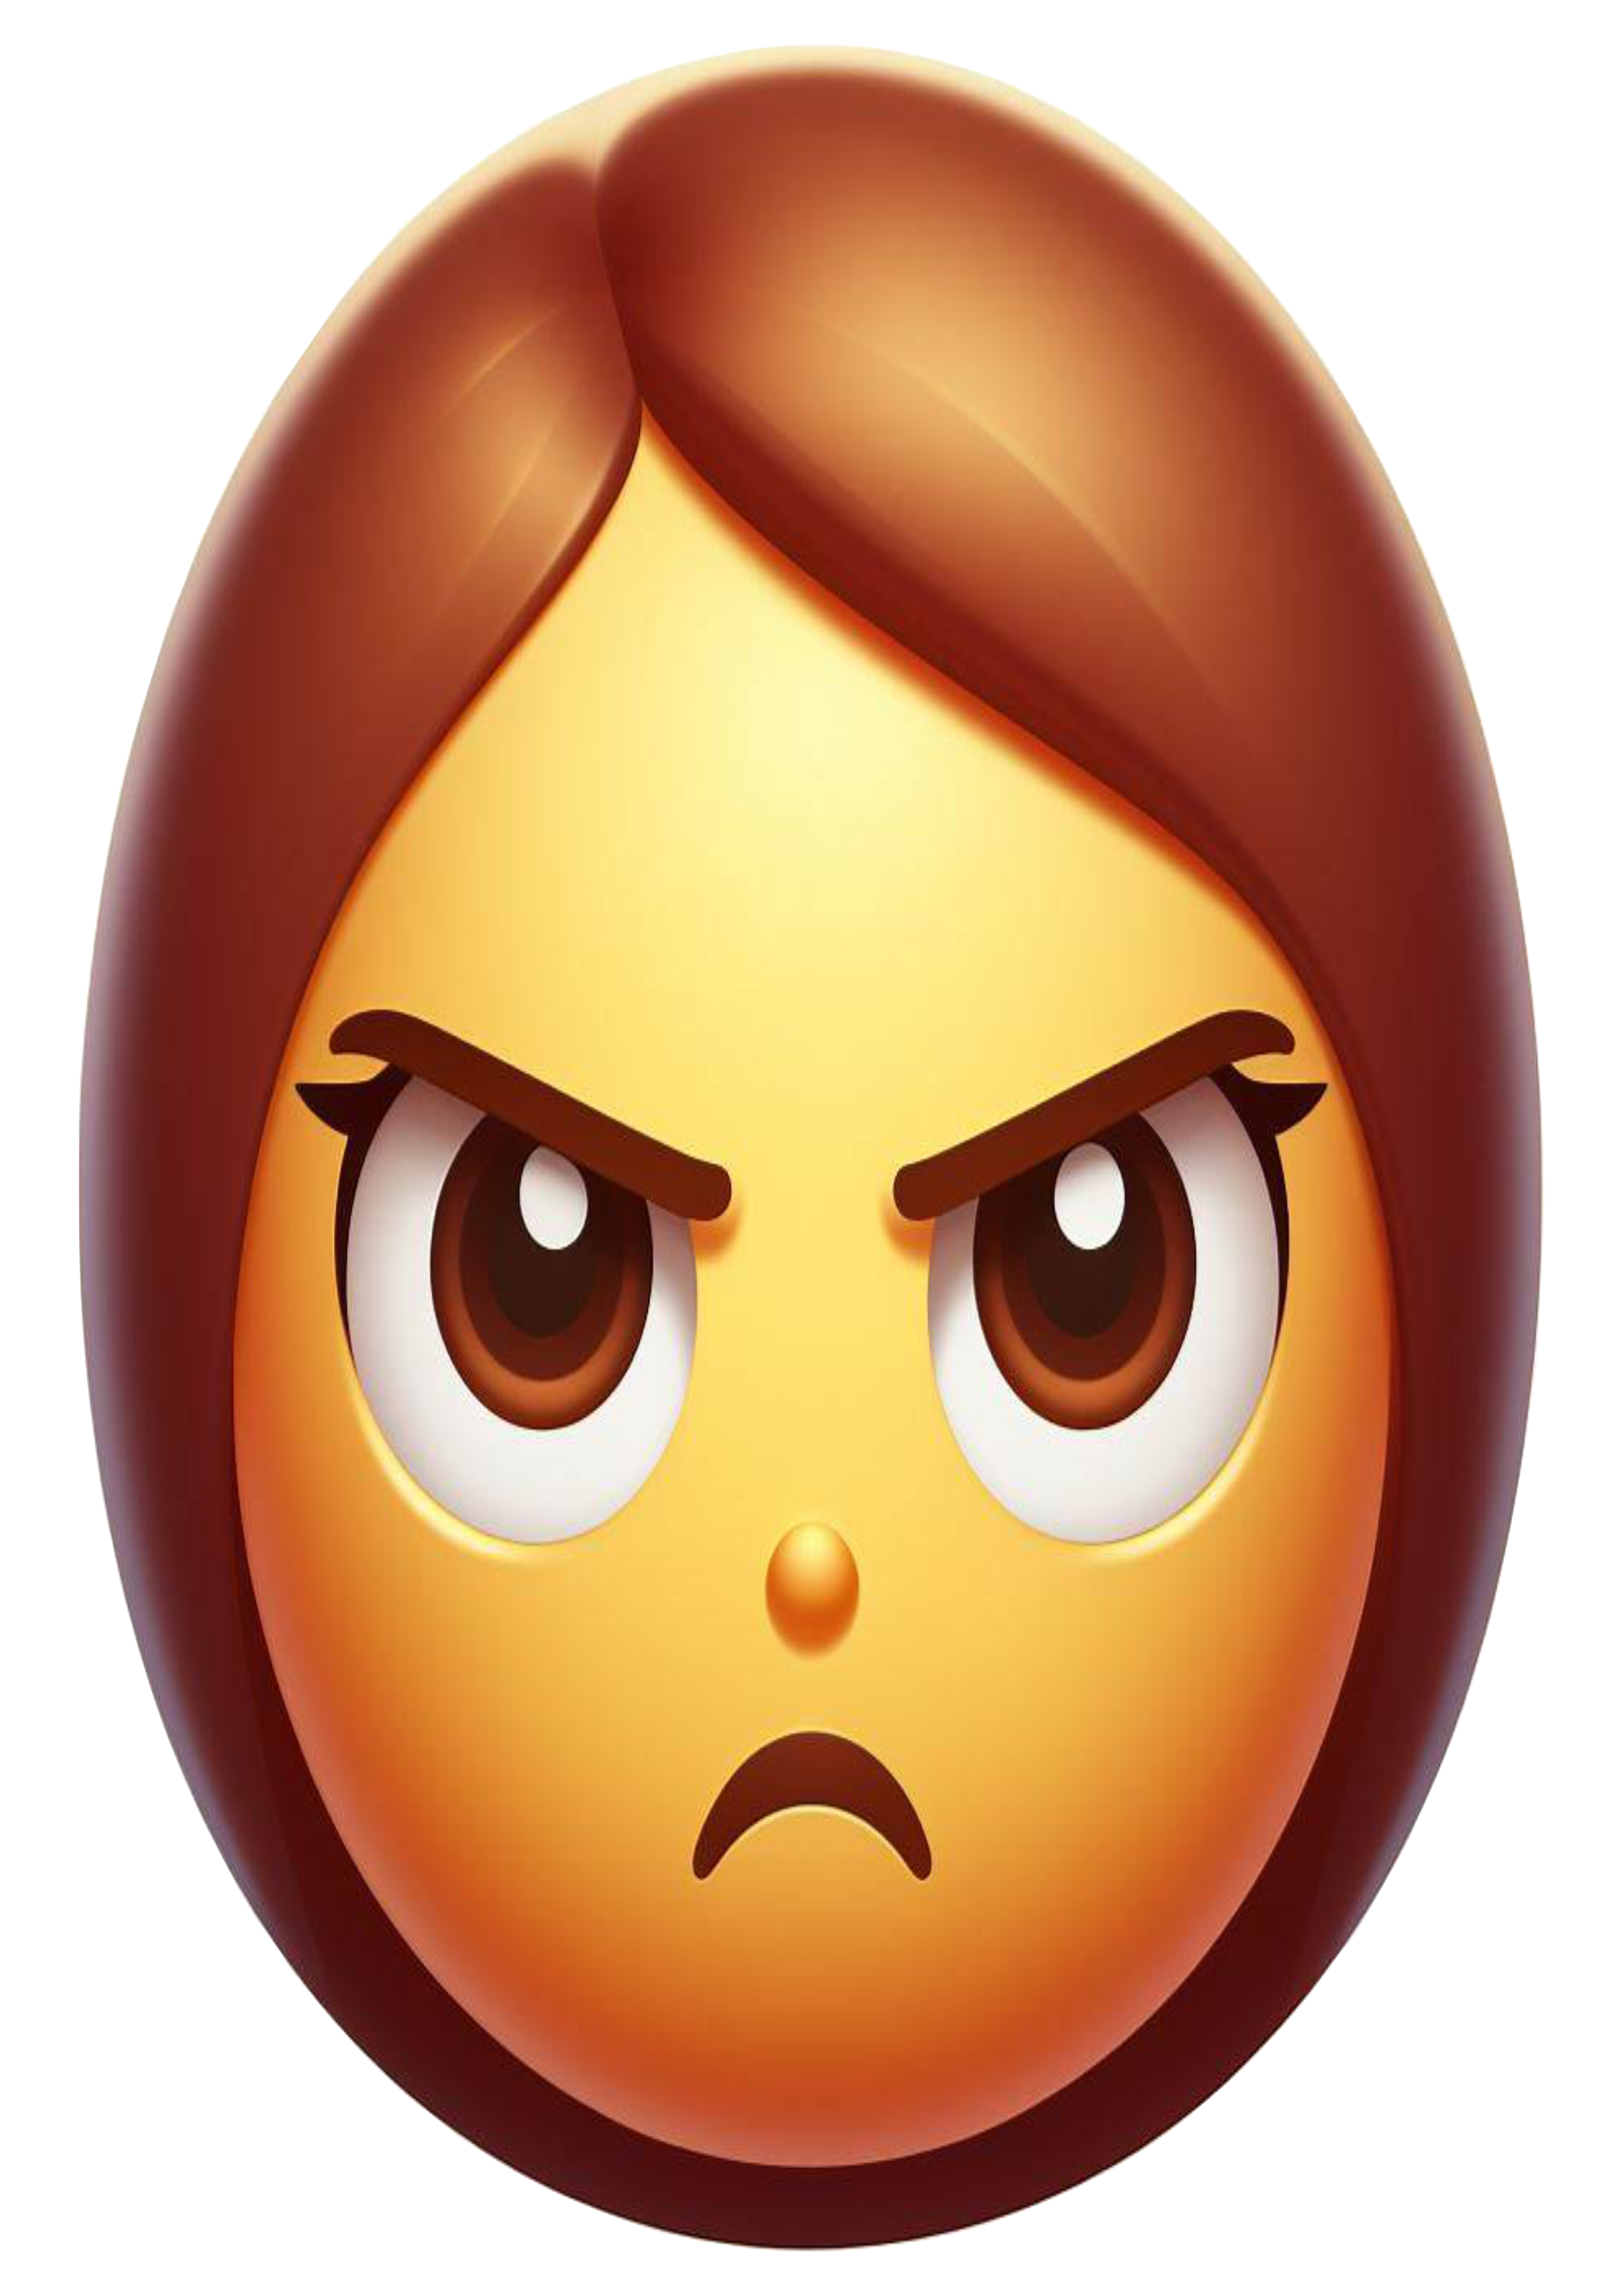 Emoticon Angry Woman Emojis Free PNG Transparent Background Clipart Vector Illustration